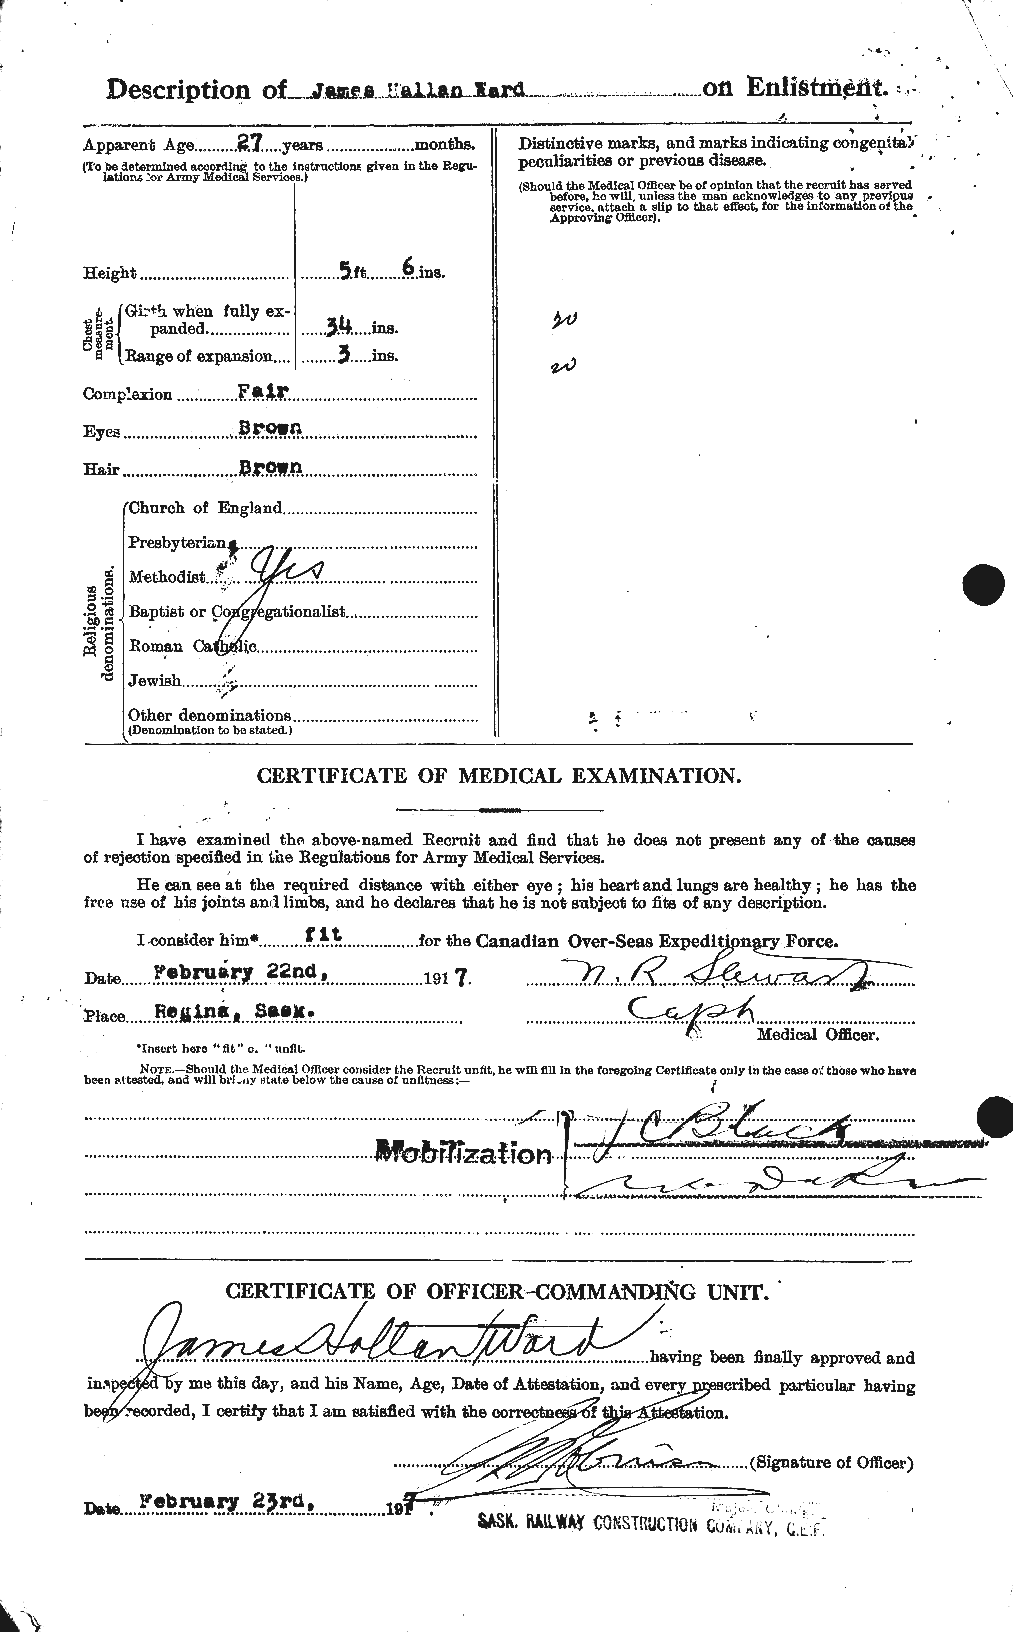 Personnel Records of the First World War - CEF 657908b